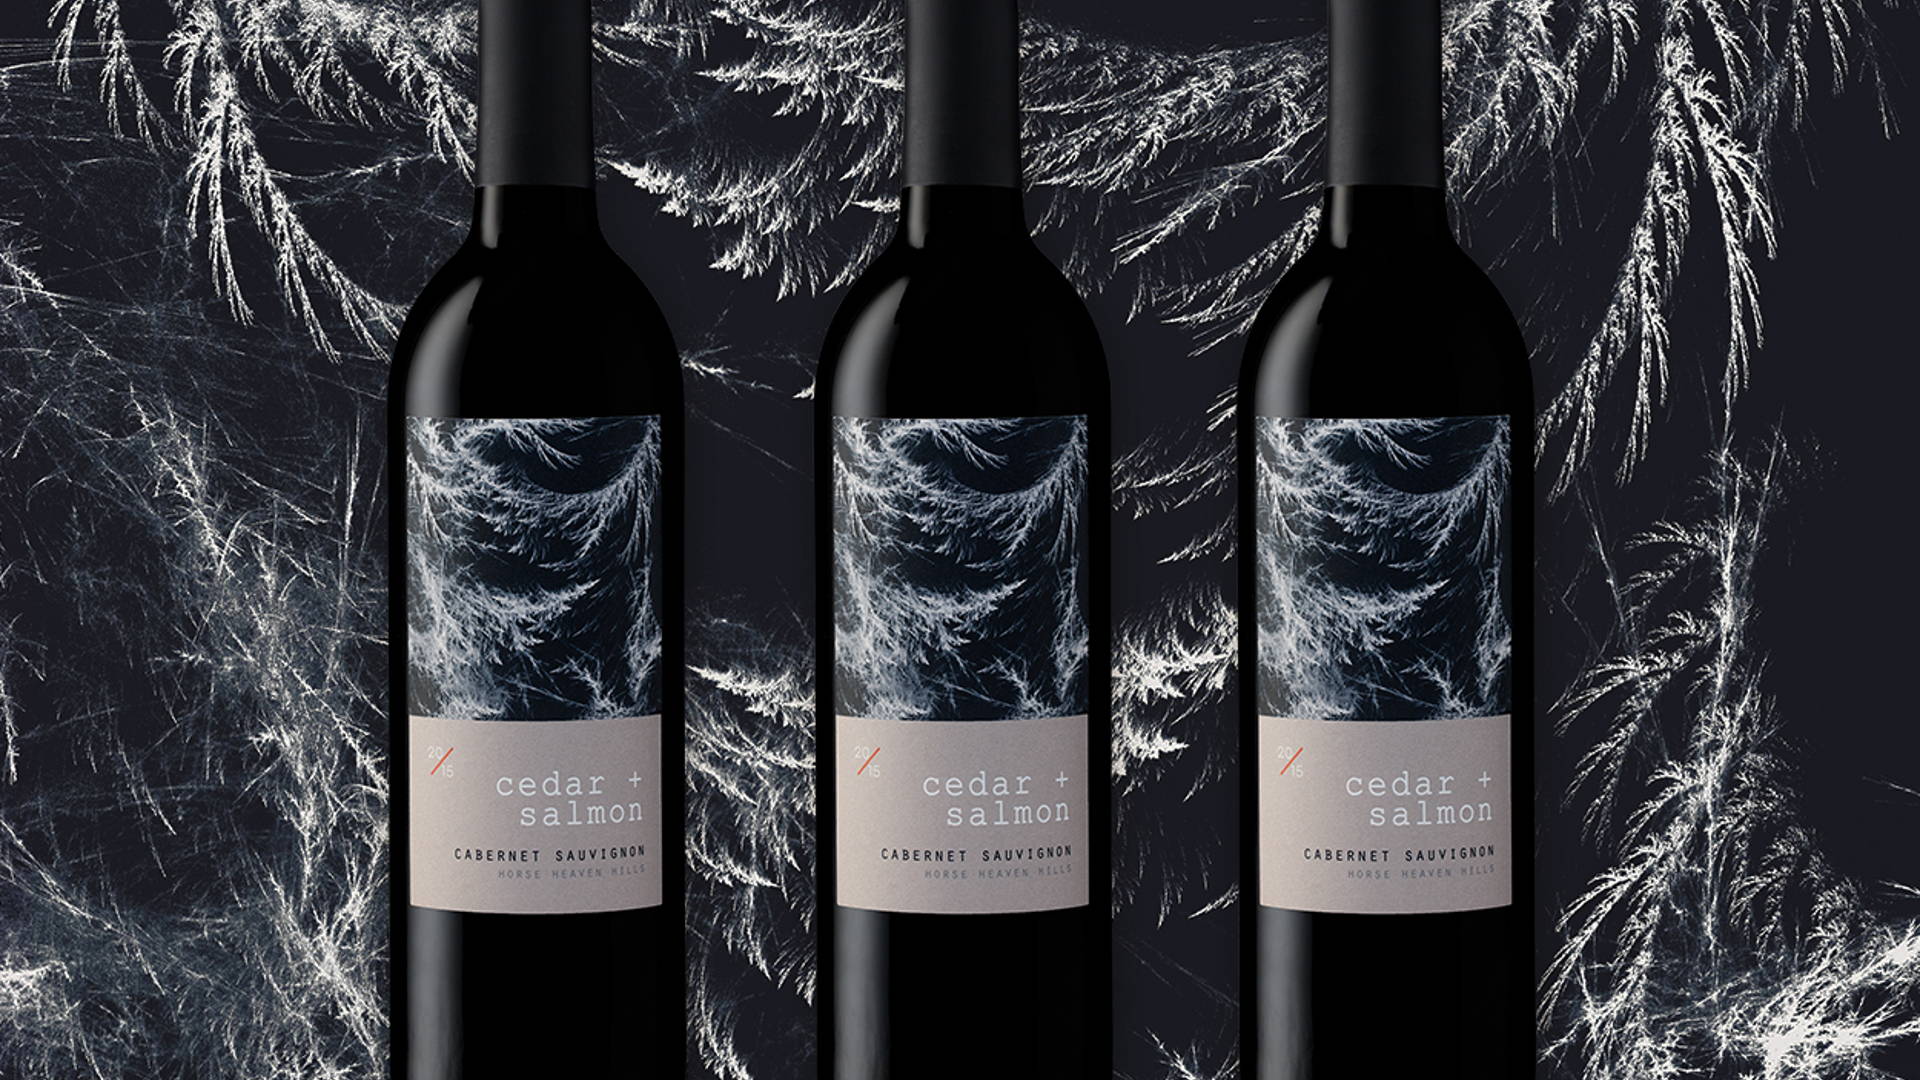 Featured image for These Wines Honor The Spirit of the Pacific Northwest With Their Packaging